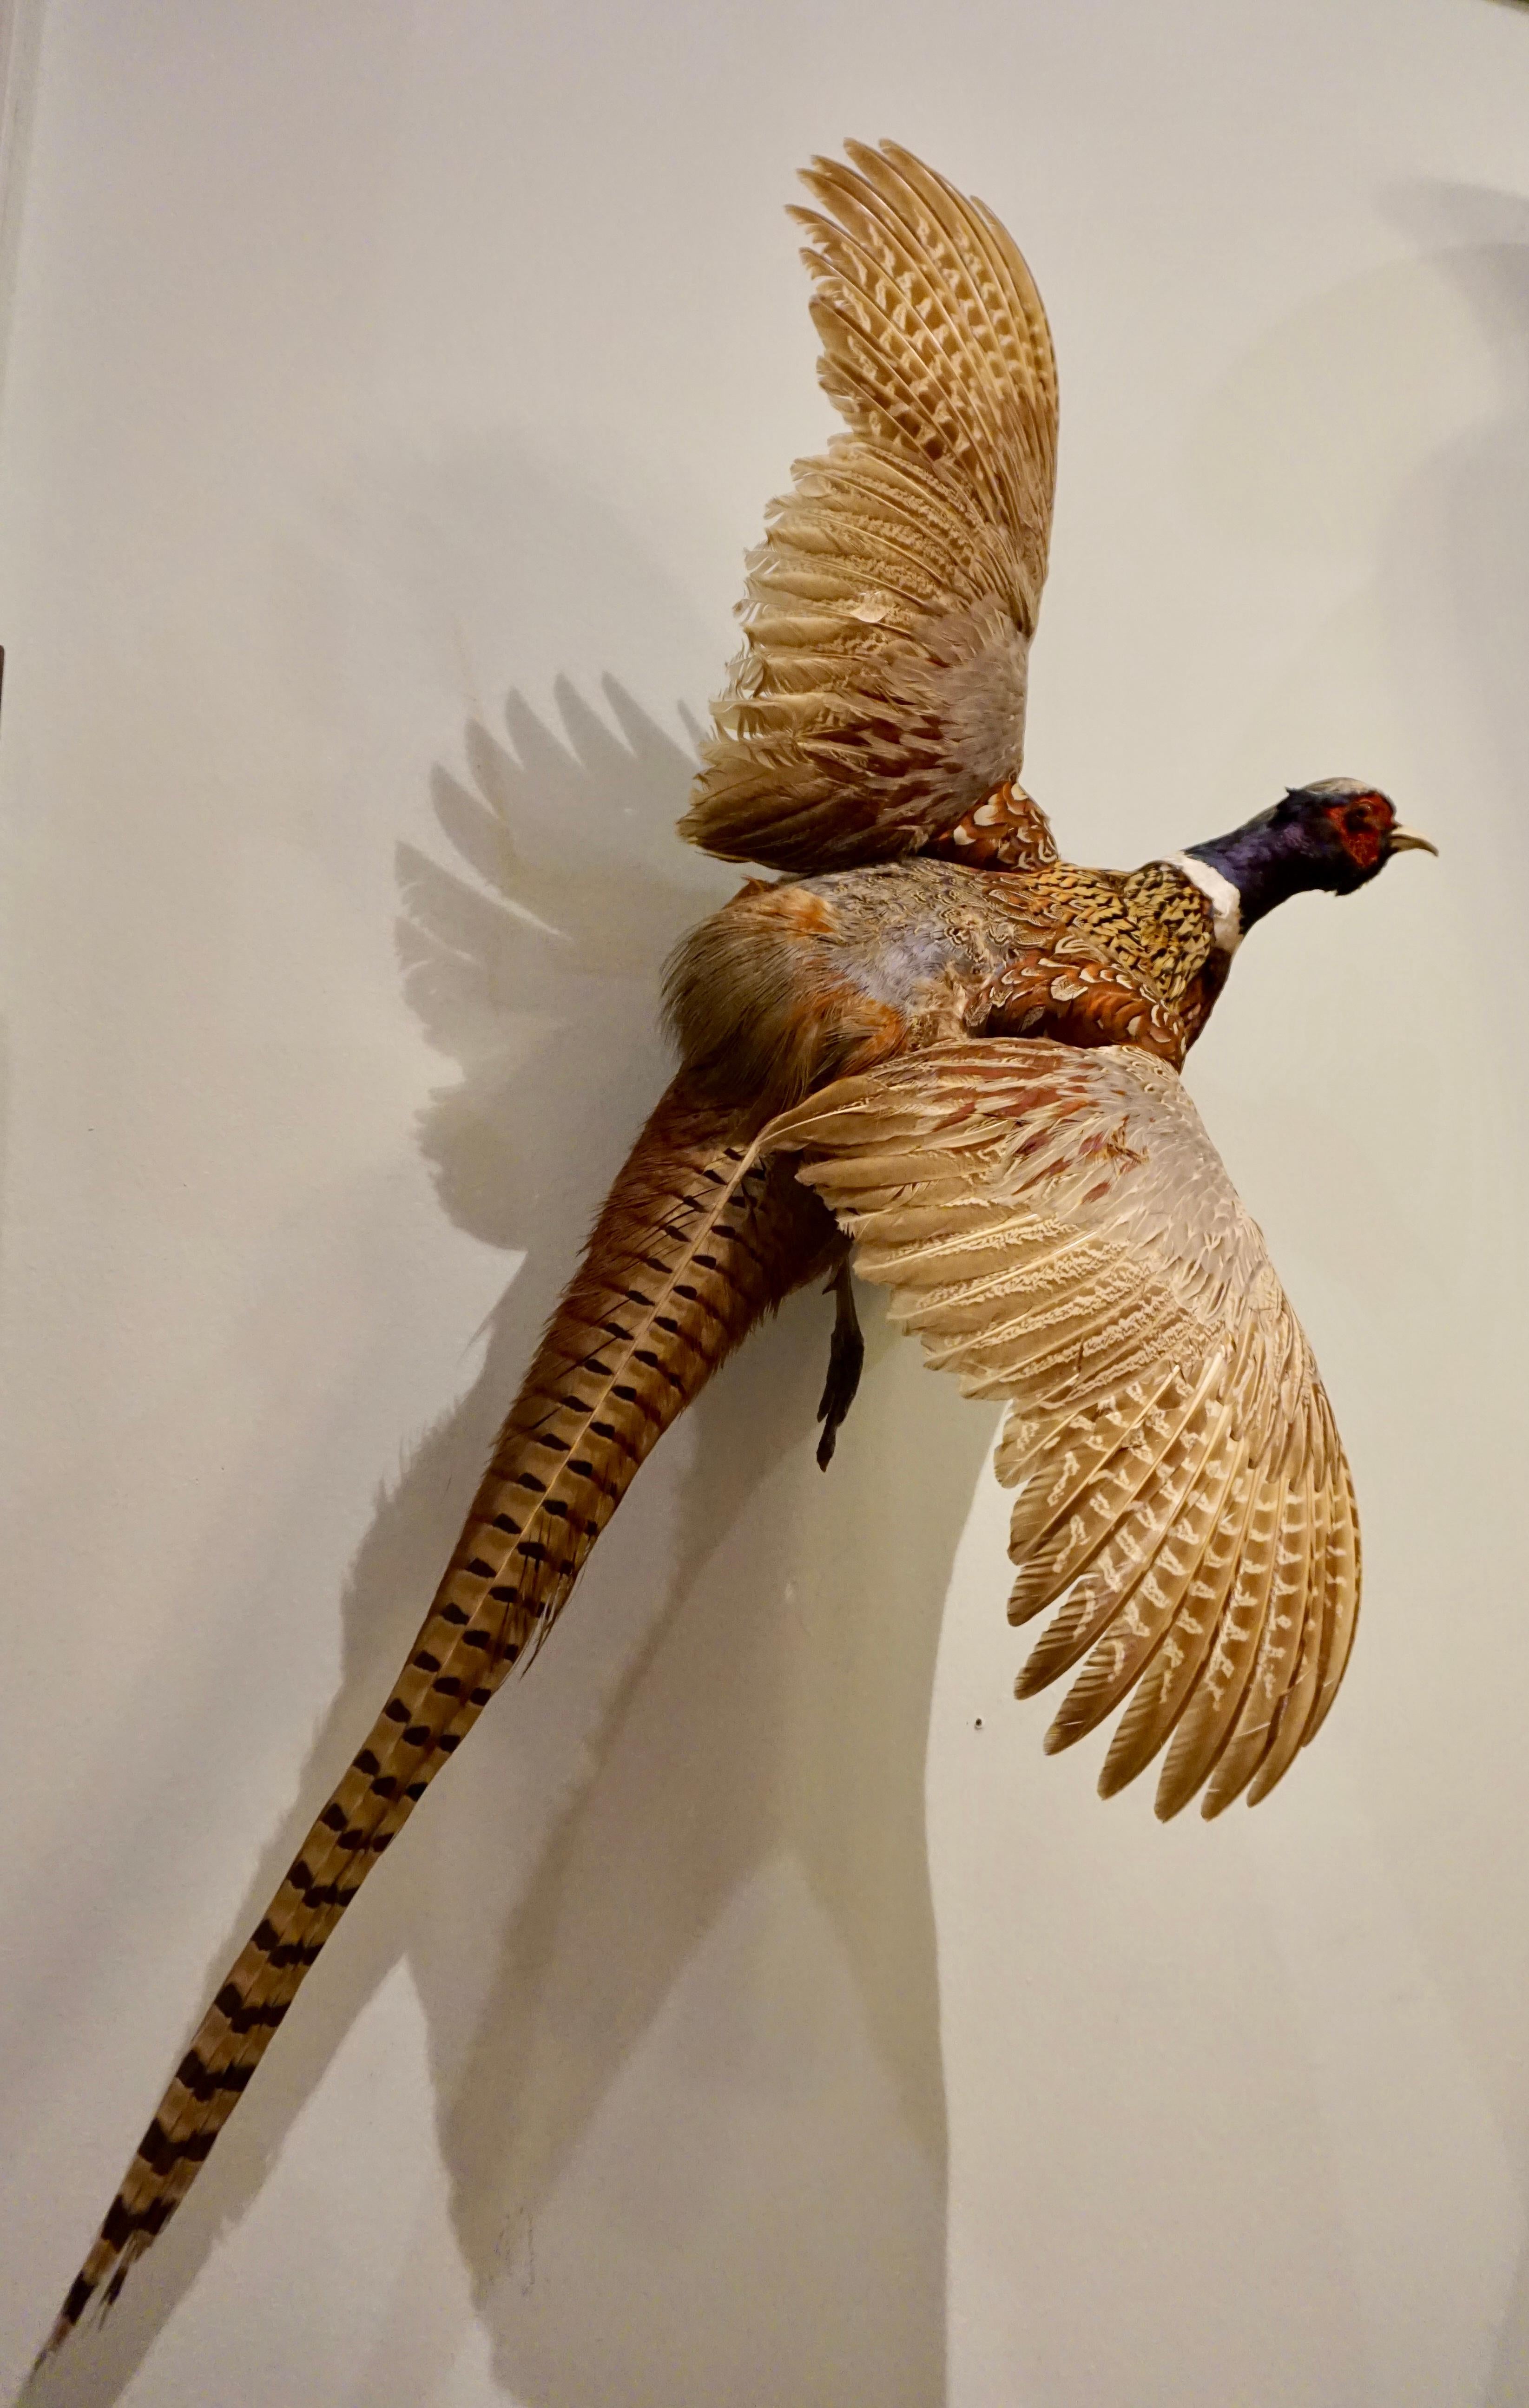 In good condition with coiled metal hook for poised wall hanging in flighted posture. Incredible colours on neck and feathers. A true conversation piece!.